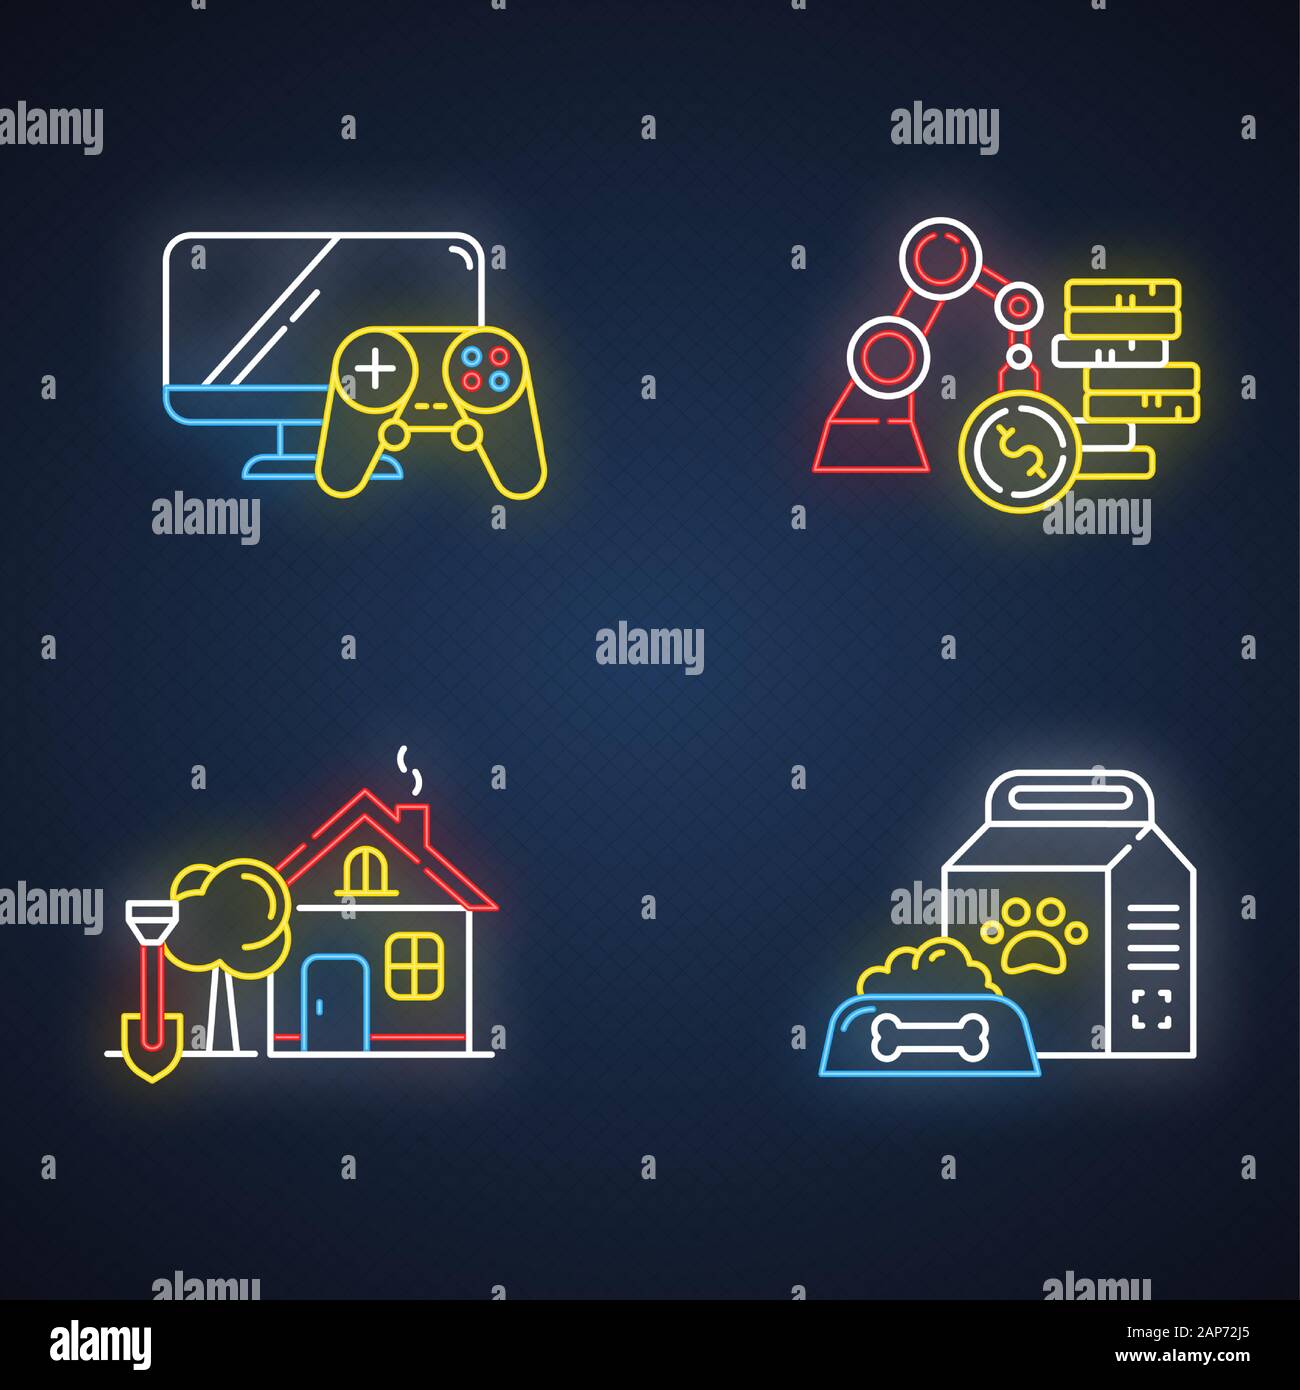 E commerce departments neon light icons set. Online shopping categories. Pet supplies. Home and garden. Business and industrial. Video games and conso Stock Vector